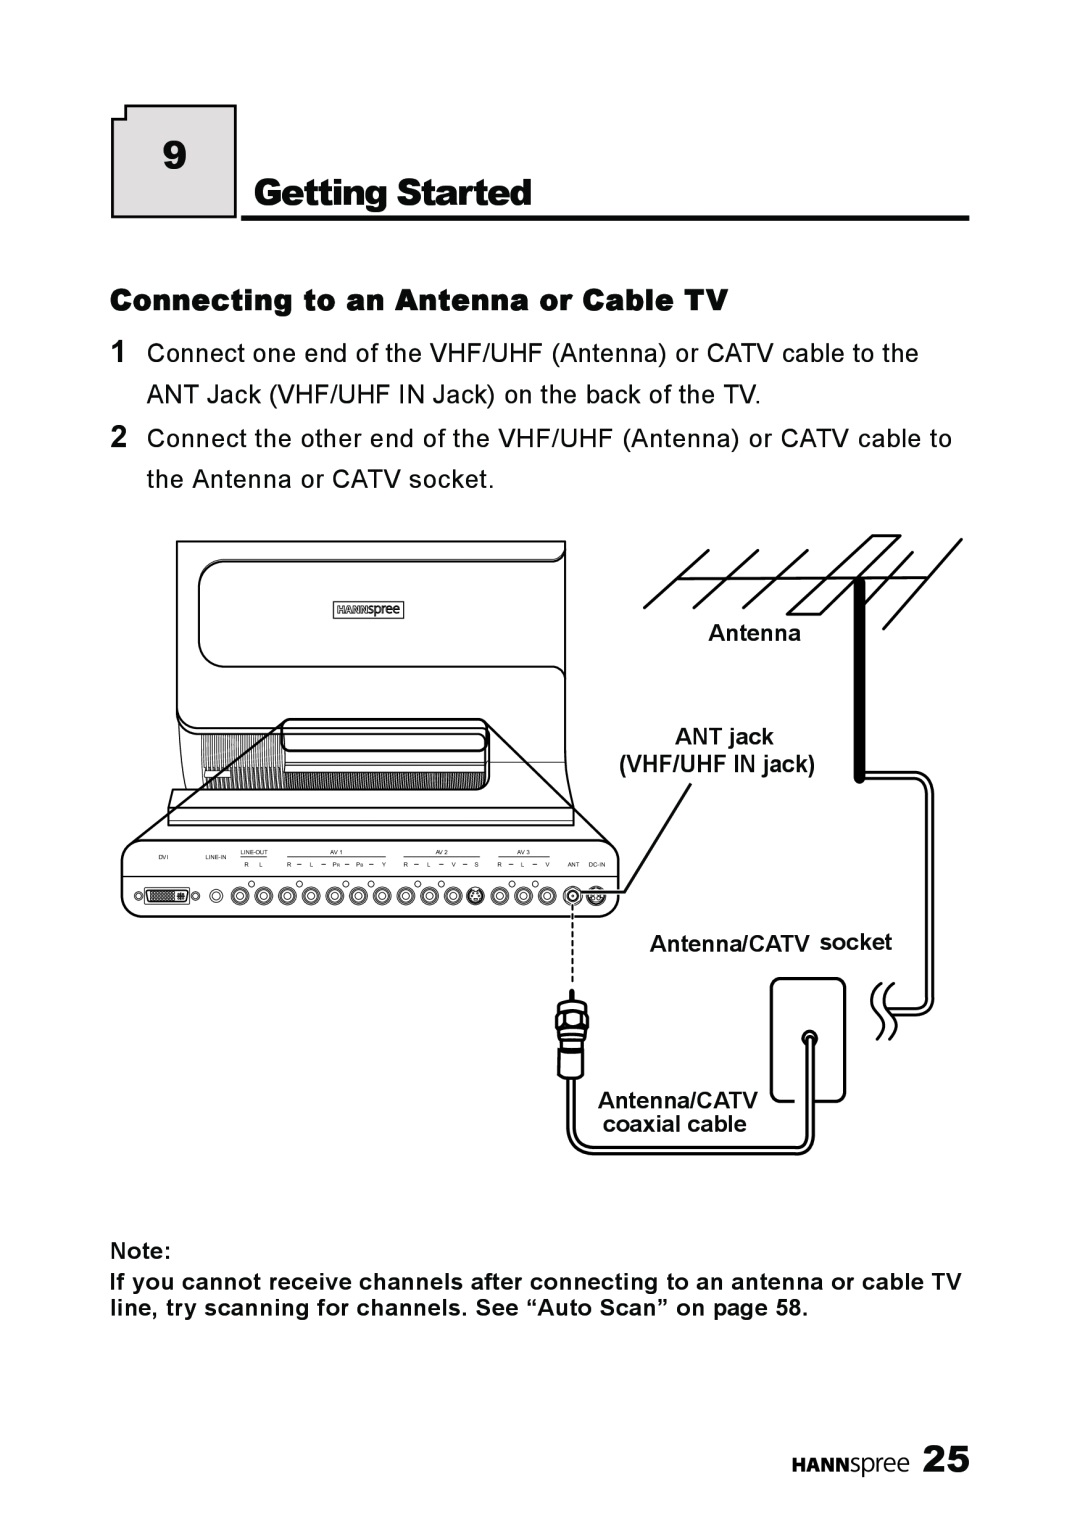 HANNspree LT11-23A1 user manual Getting Started, Connecting to an Antenna or Cable TV, VHF/UHF IN jack 